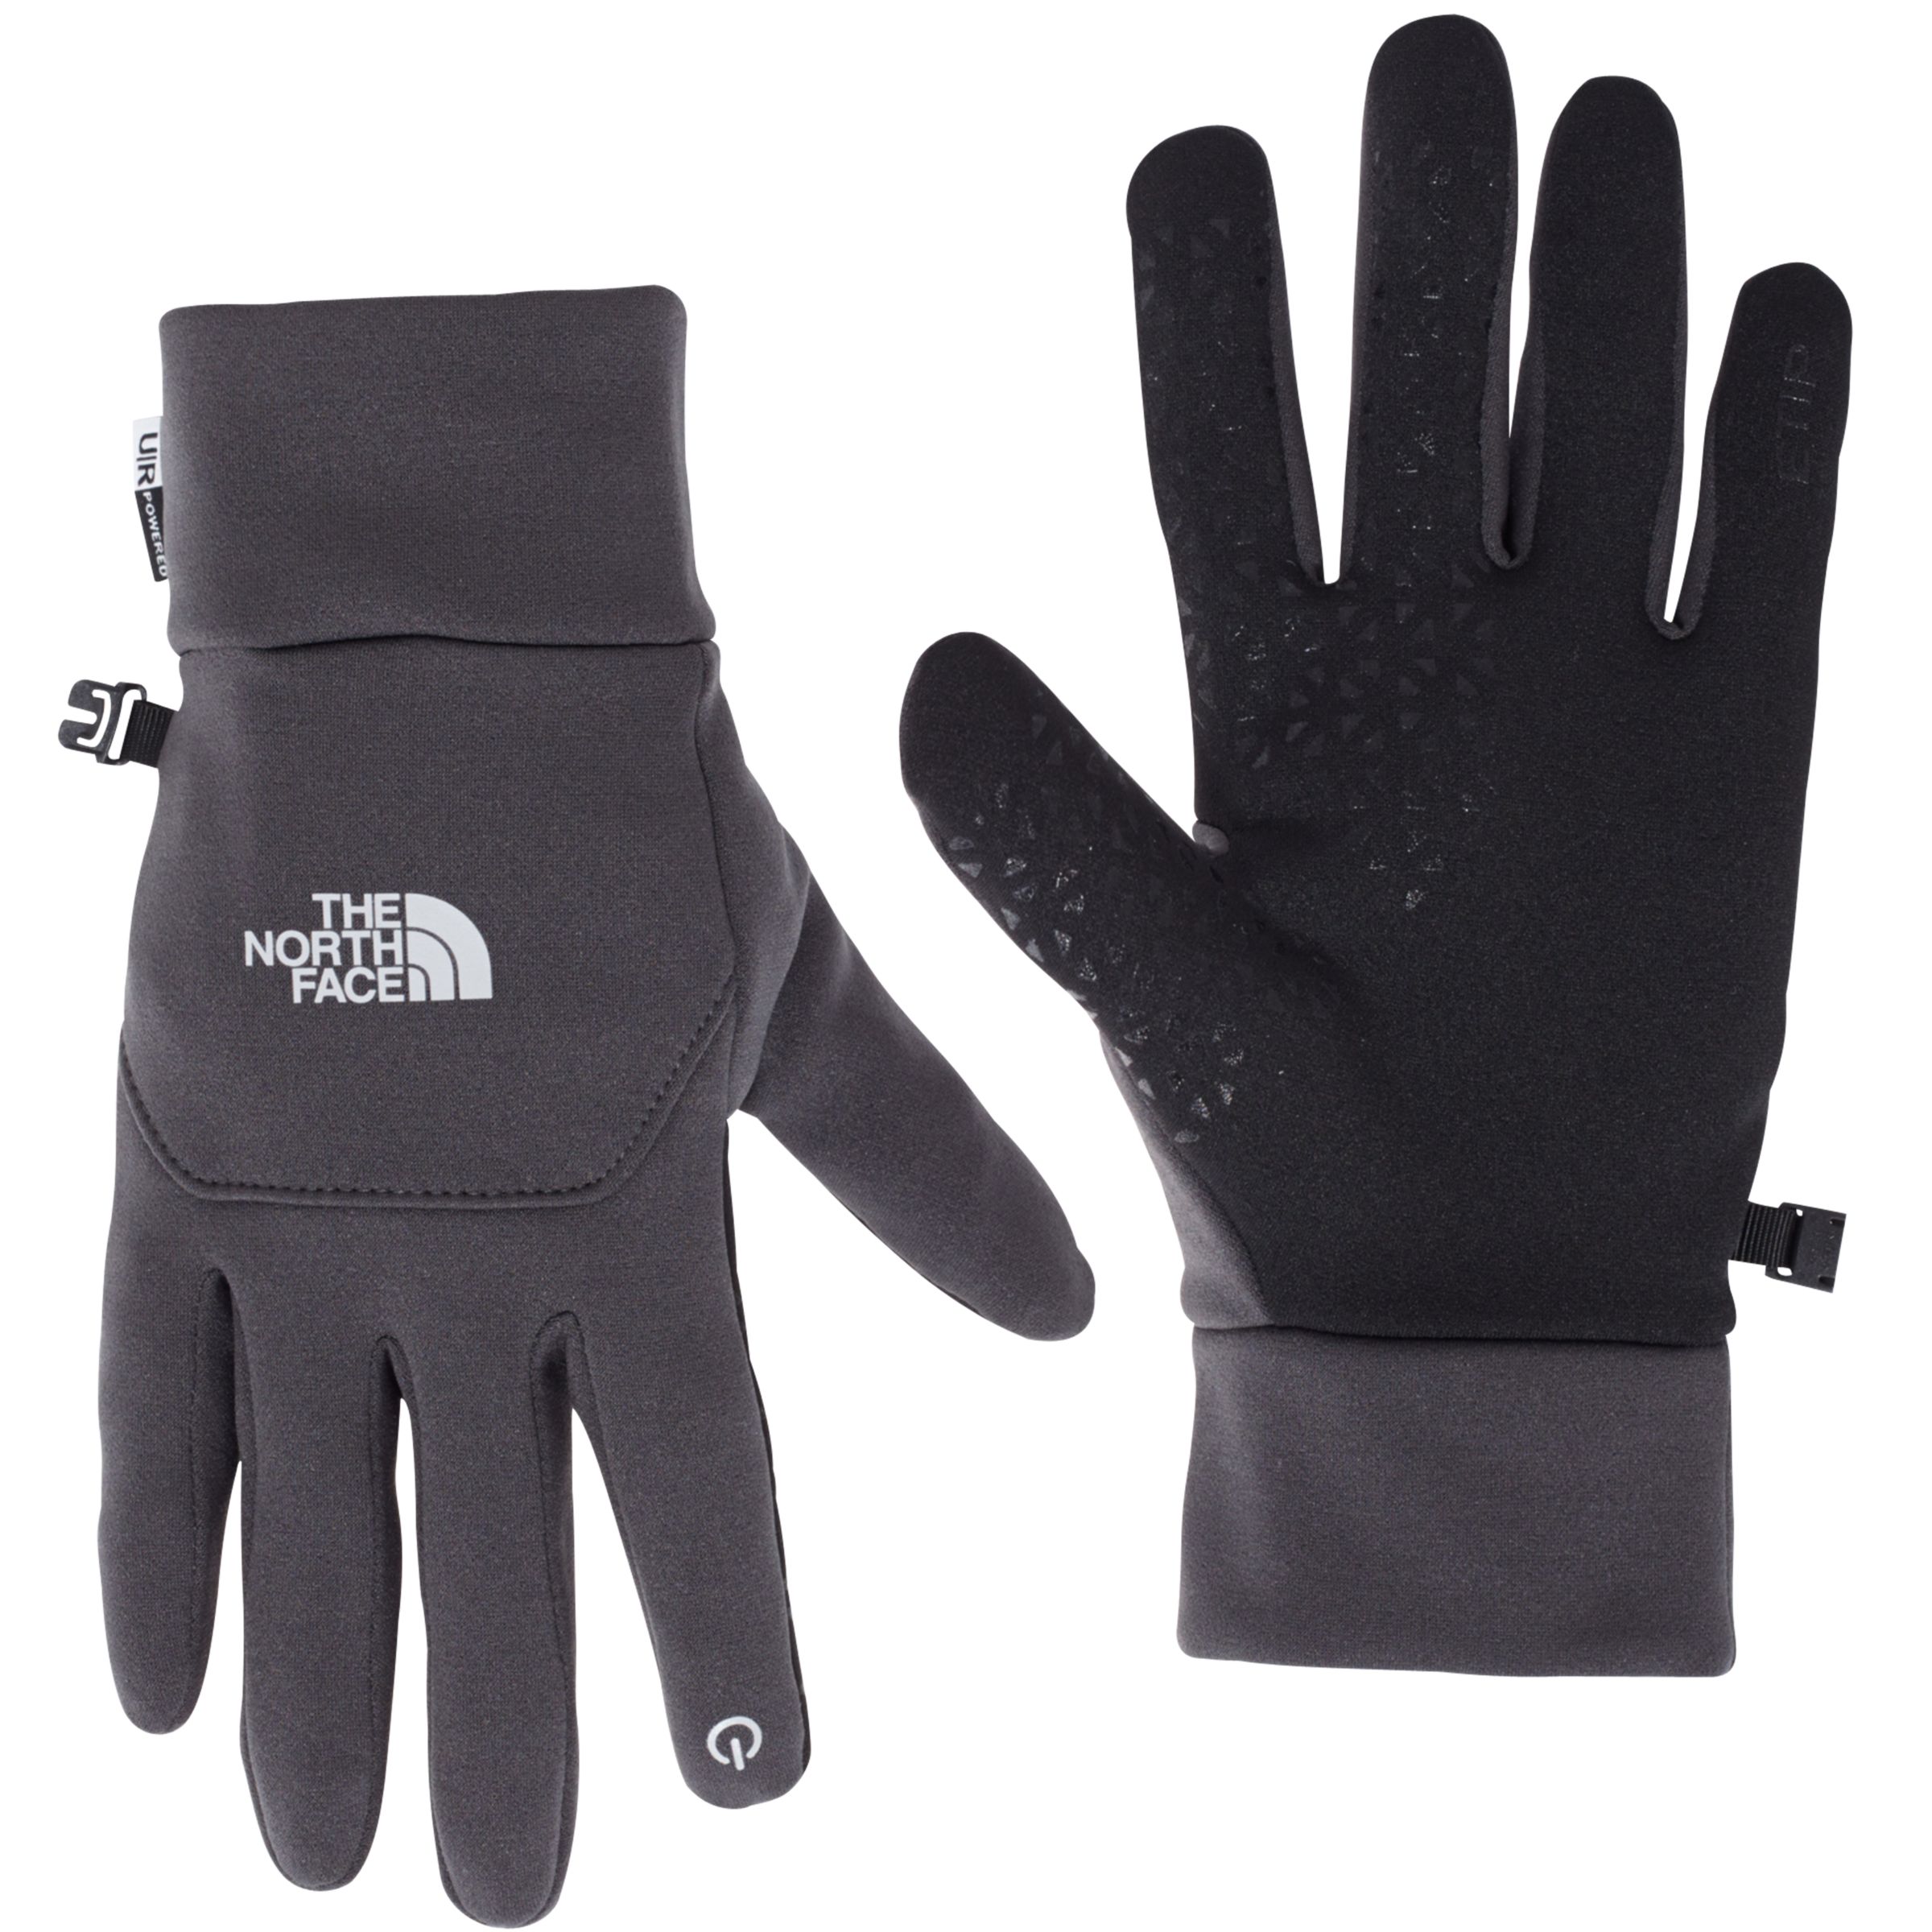 The North Face Etip Gloves, Grey at 